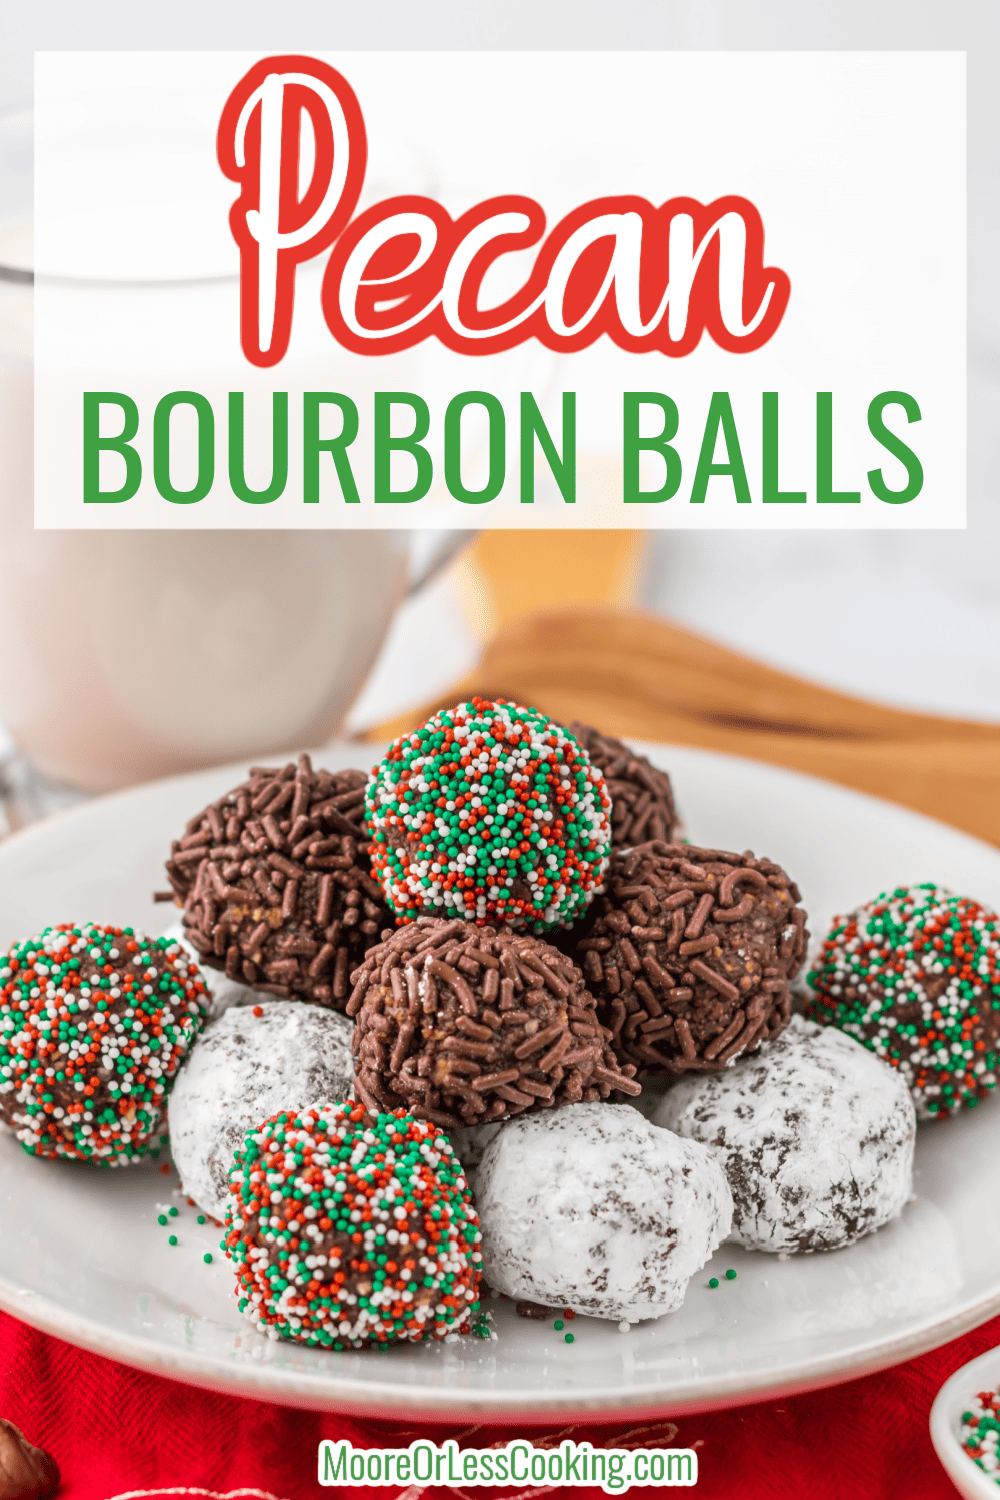 Pecan Bourbon Balls – dangerously delicious!! I could eat the whole batch! These irresistible Pecan Bourbon Balls are the boozy sweet treat that comes together in just minutes, perfect for holiday parties, tailgating, snacks, or homemade gift giving. Chocolate, nuts, sugar, and bourbon make these bite-sized dessert truffles the easiest no-bake effort of the season! Can swap maple syrup for the Bourbon for a kid-friendly alcohol-free treat! A MUST for your holiday cookie tray! via @Mooreorlesscook